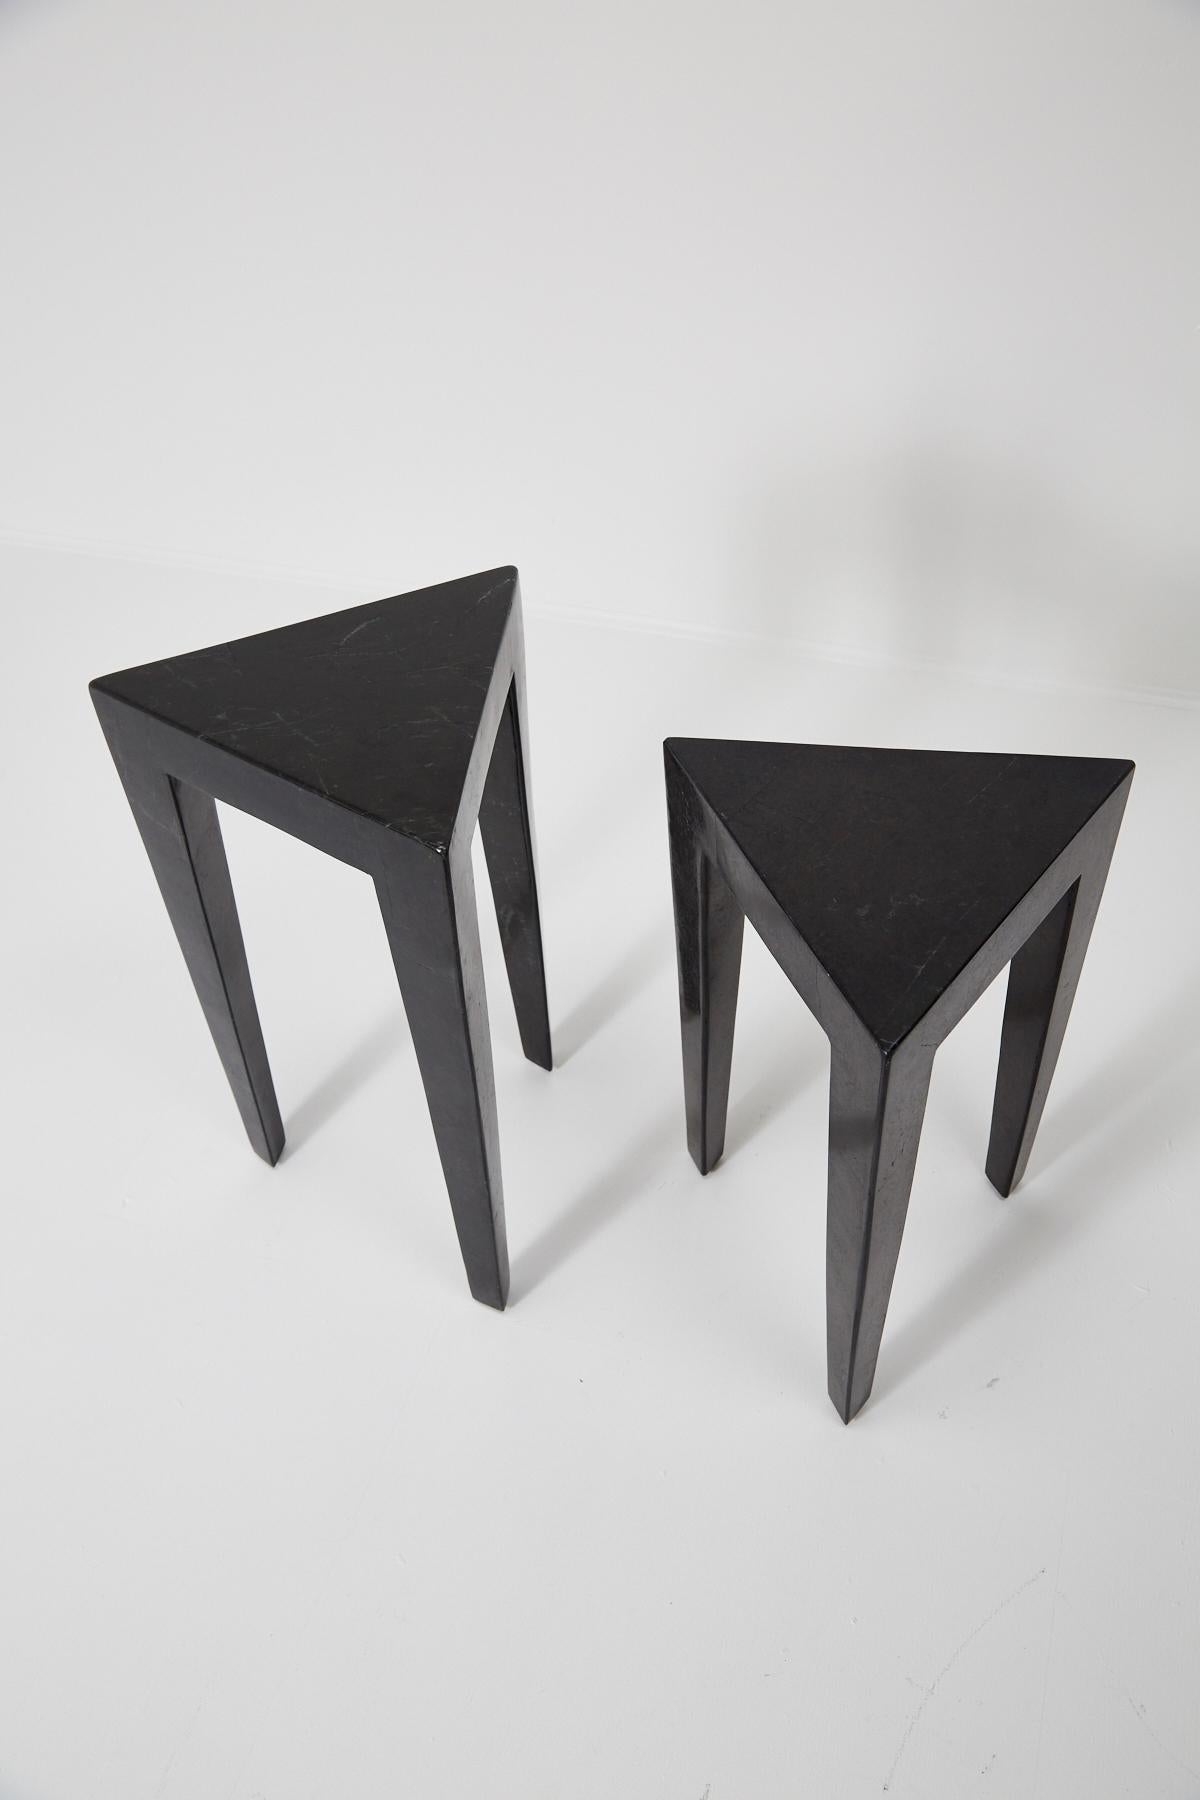 Black Tessellated Stone Triangular Nesting Tables, 1990s For Sale 1